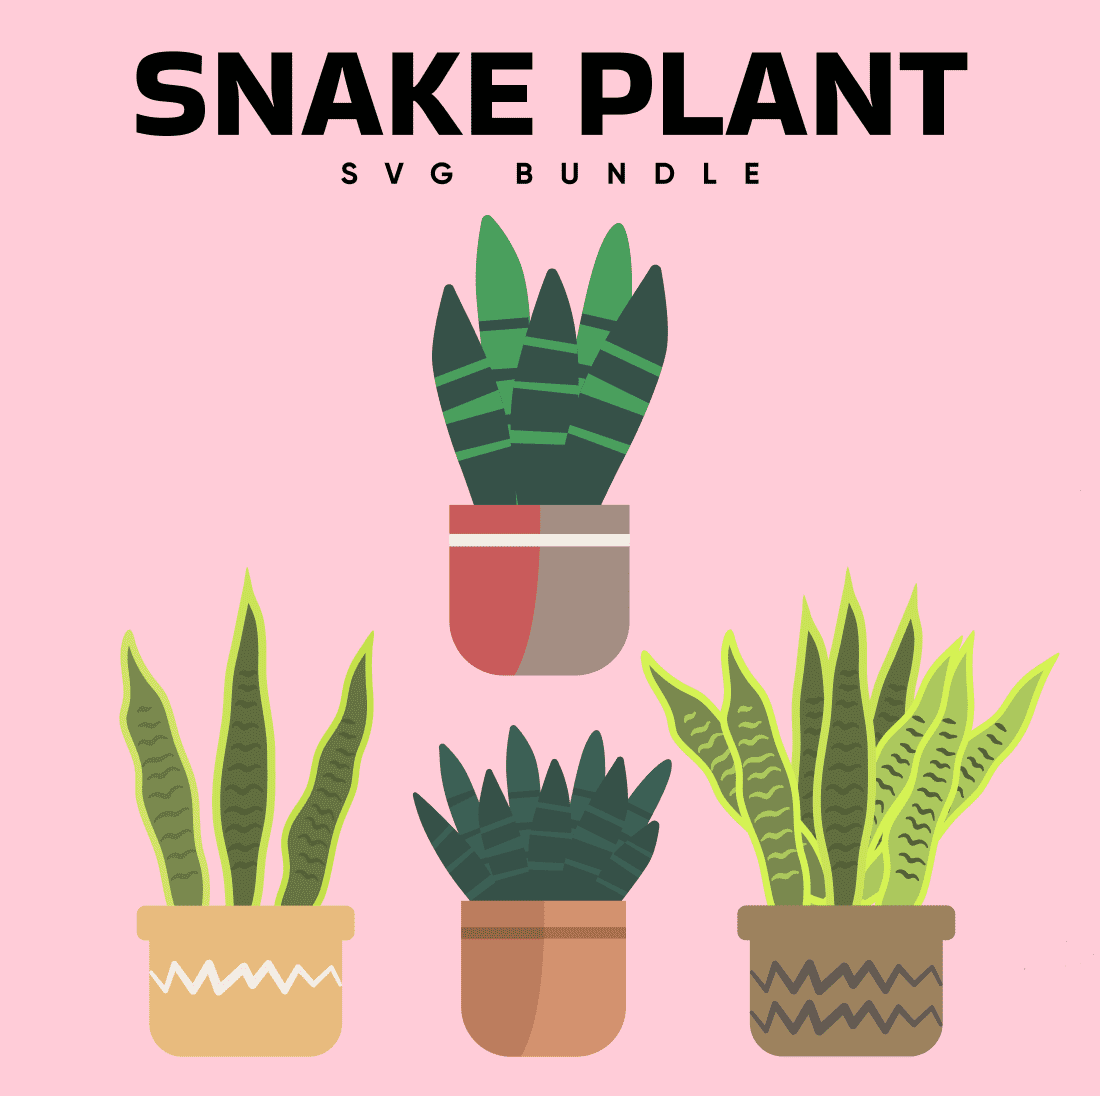 Snake Plant SVG Bundle, first picture 1100x1100.